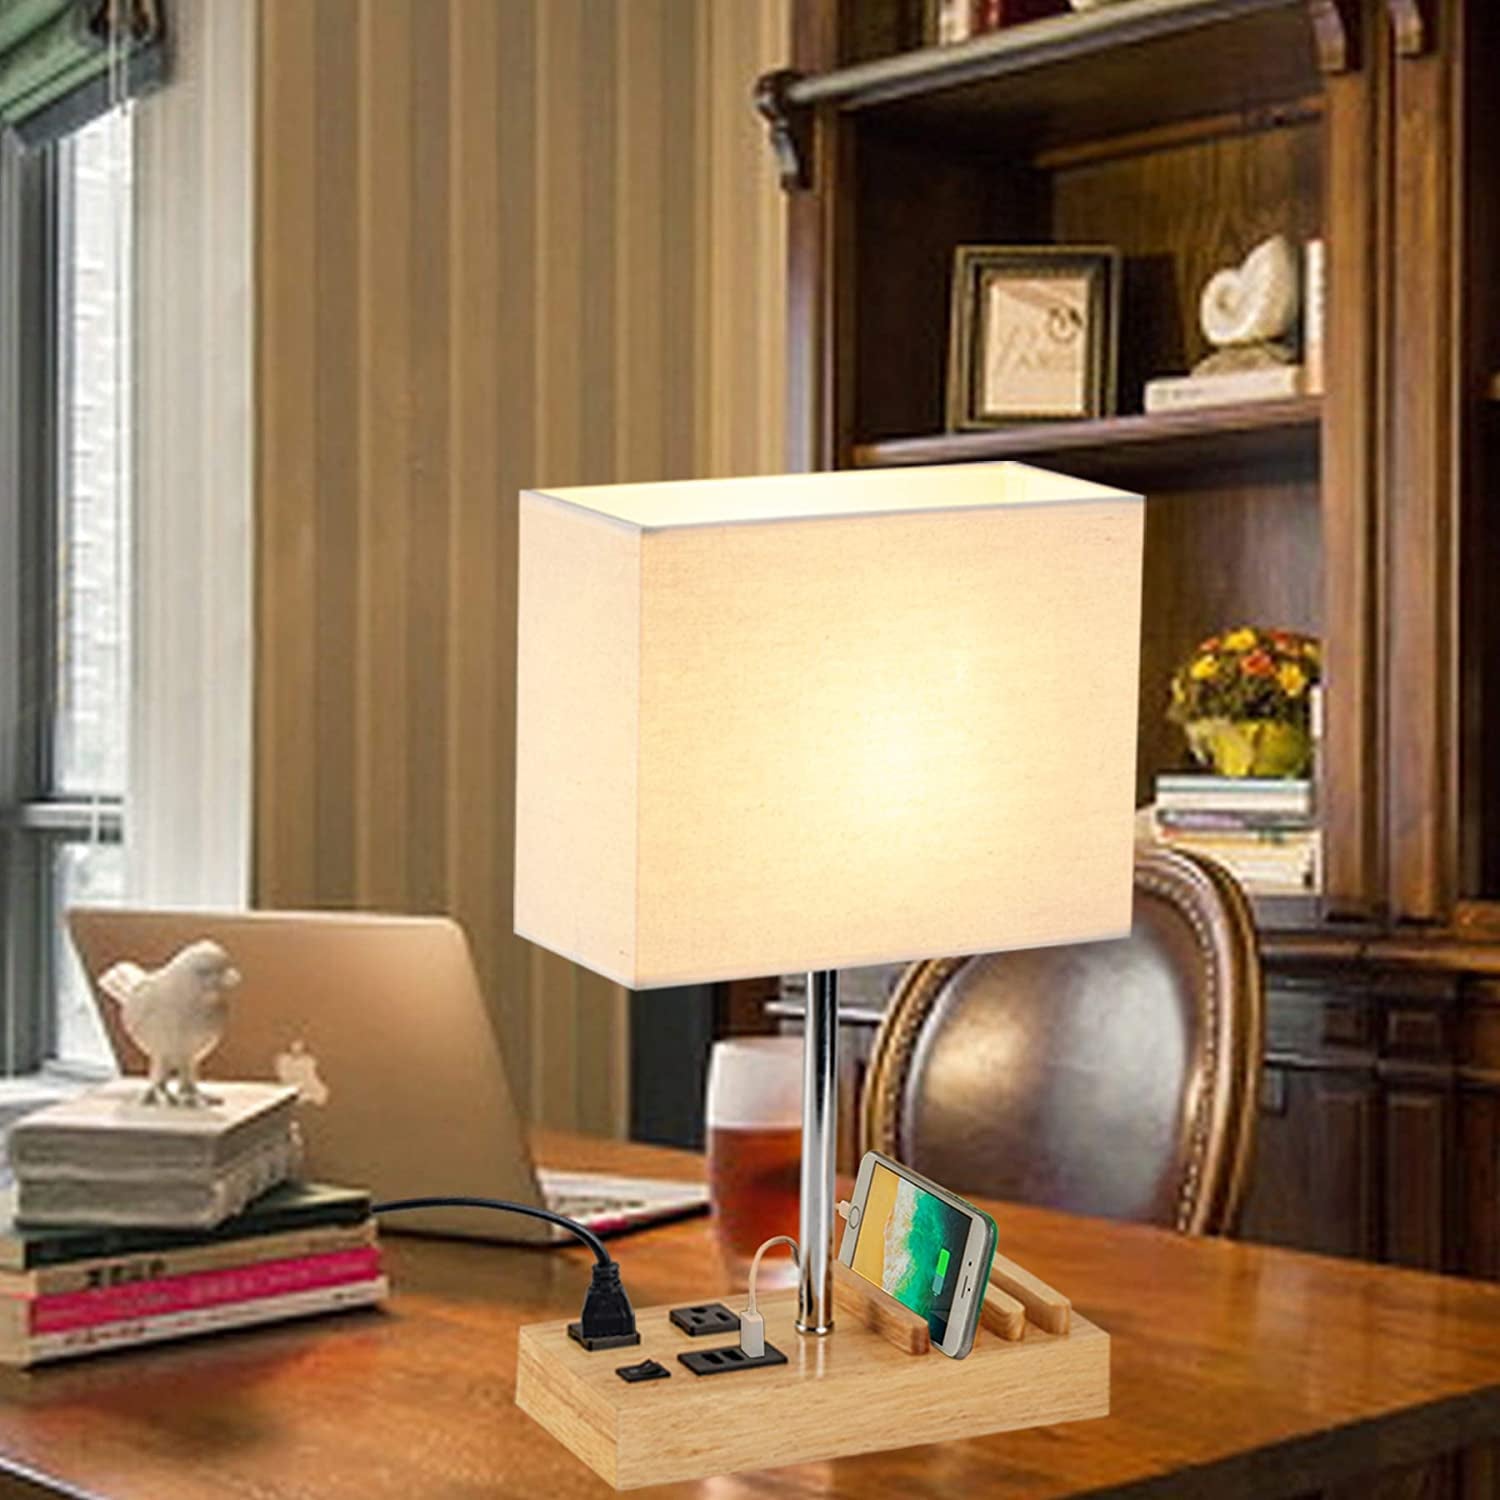 Desk Lamp with 3 USB Charging Ports, Table Lamp with 2AC Outlets and 3 Phone Stands, Nightstand Bedside Lamp with Natural Wooden Base and Cream Linen Shade